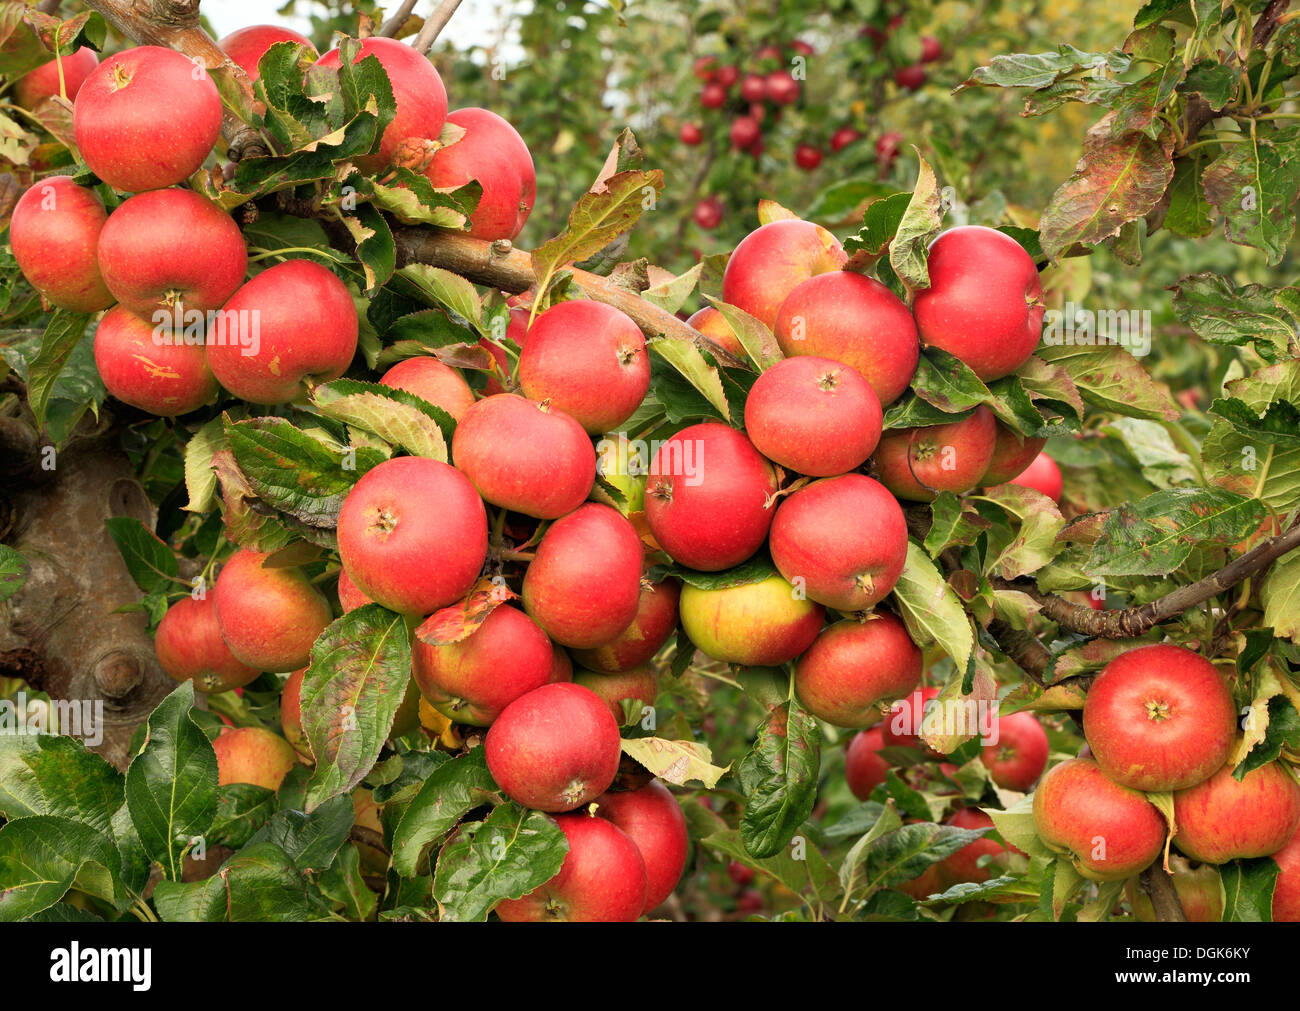 Apple 'Red Pippin',  malus domestica apples variety varieties growing on tree Stock Photo